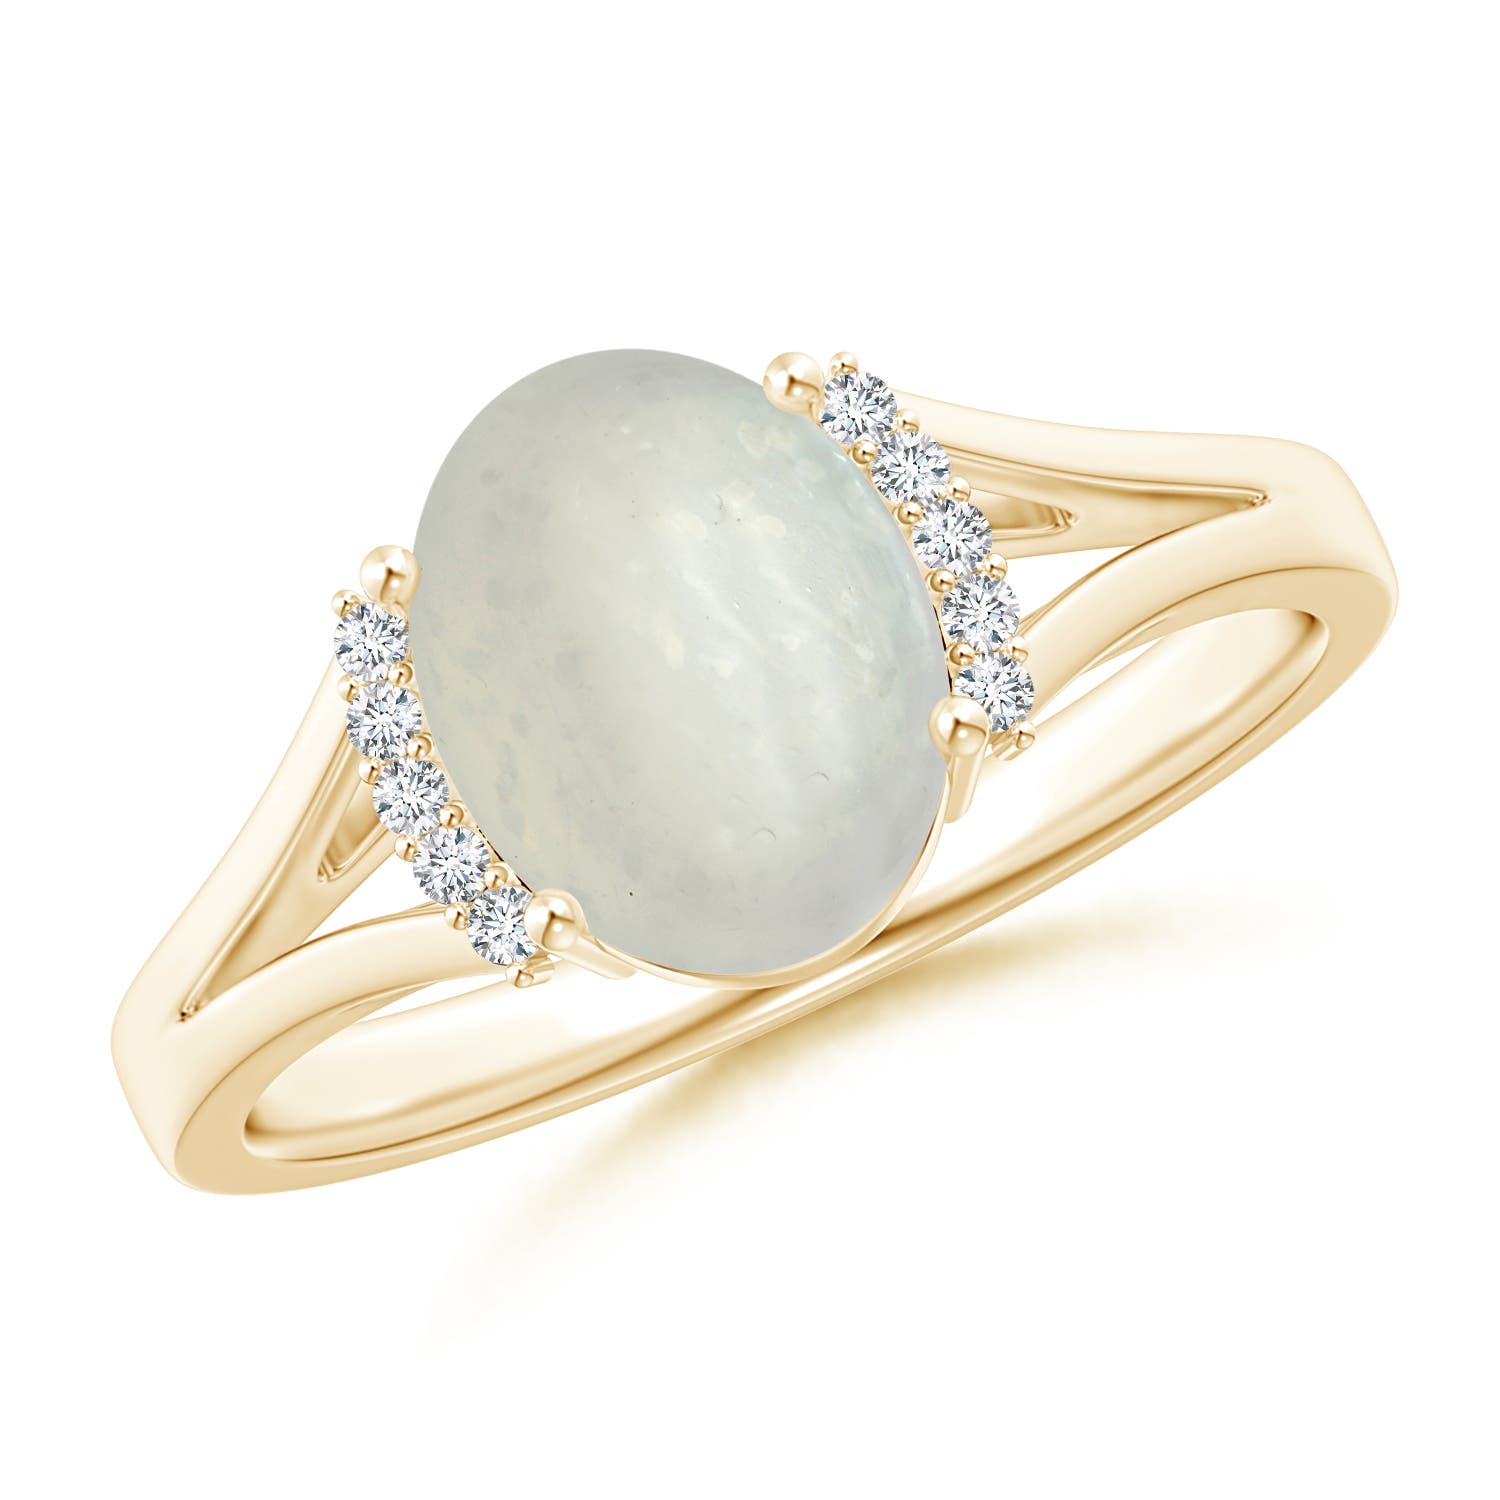 A - Moonstone / 1.77 CT / 14 KT Yellow Gold